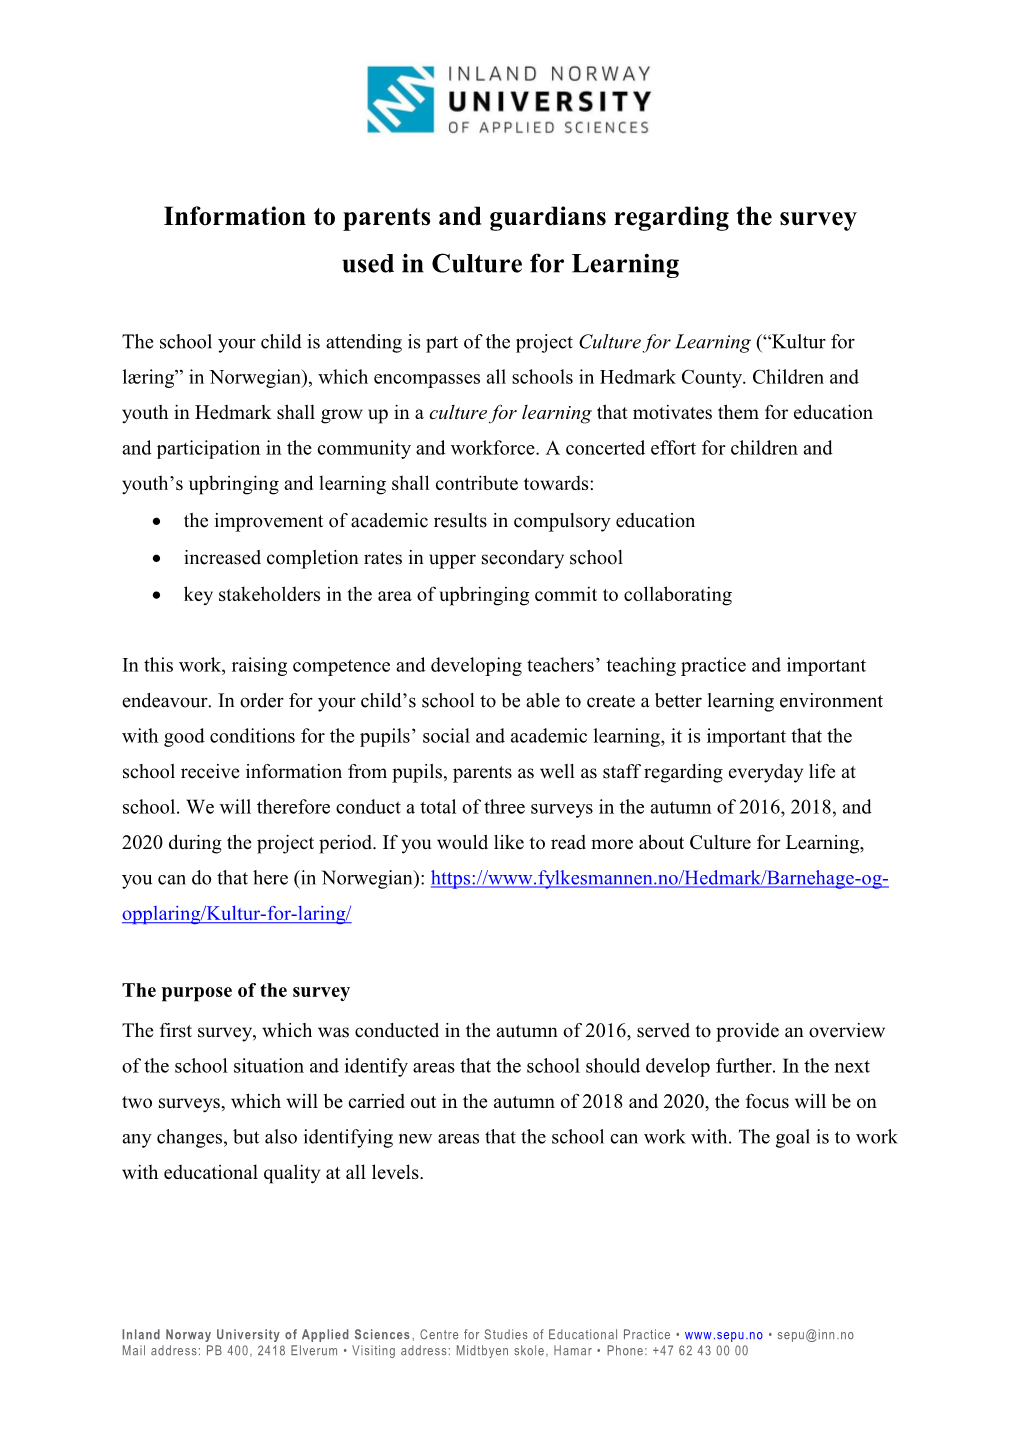 Information to Parents and Guardians Regarding the Survey Used in Culture for Learning